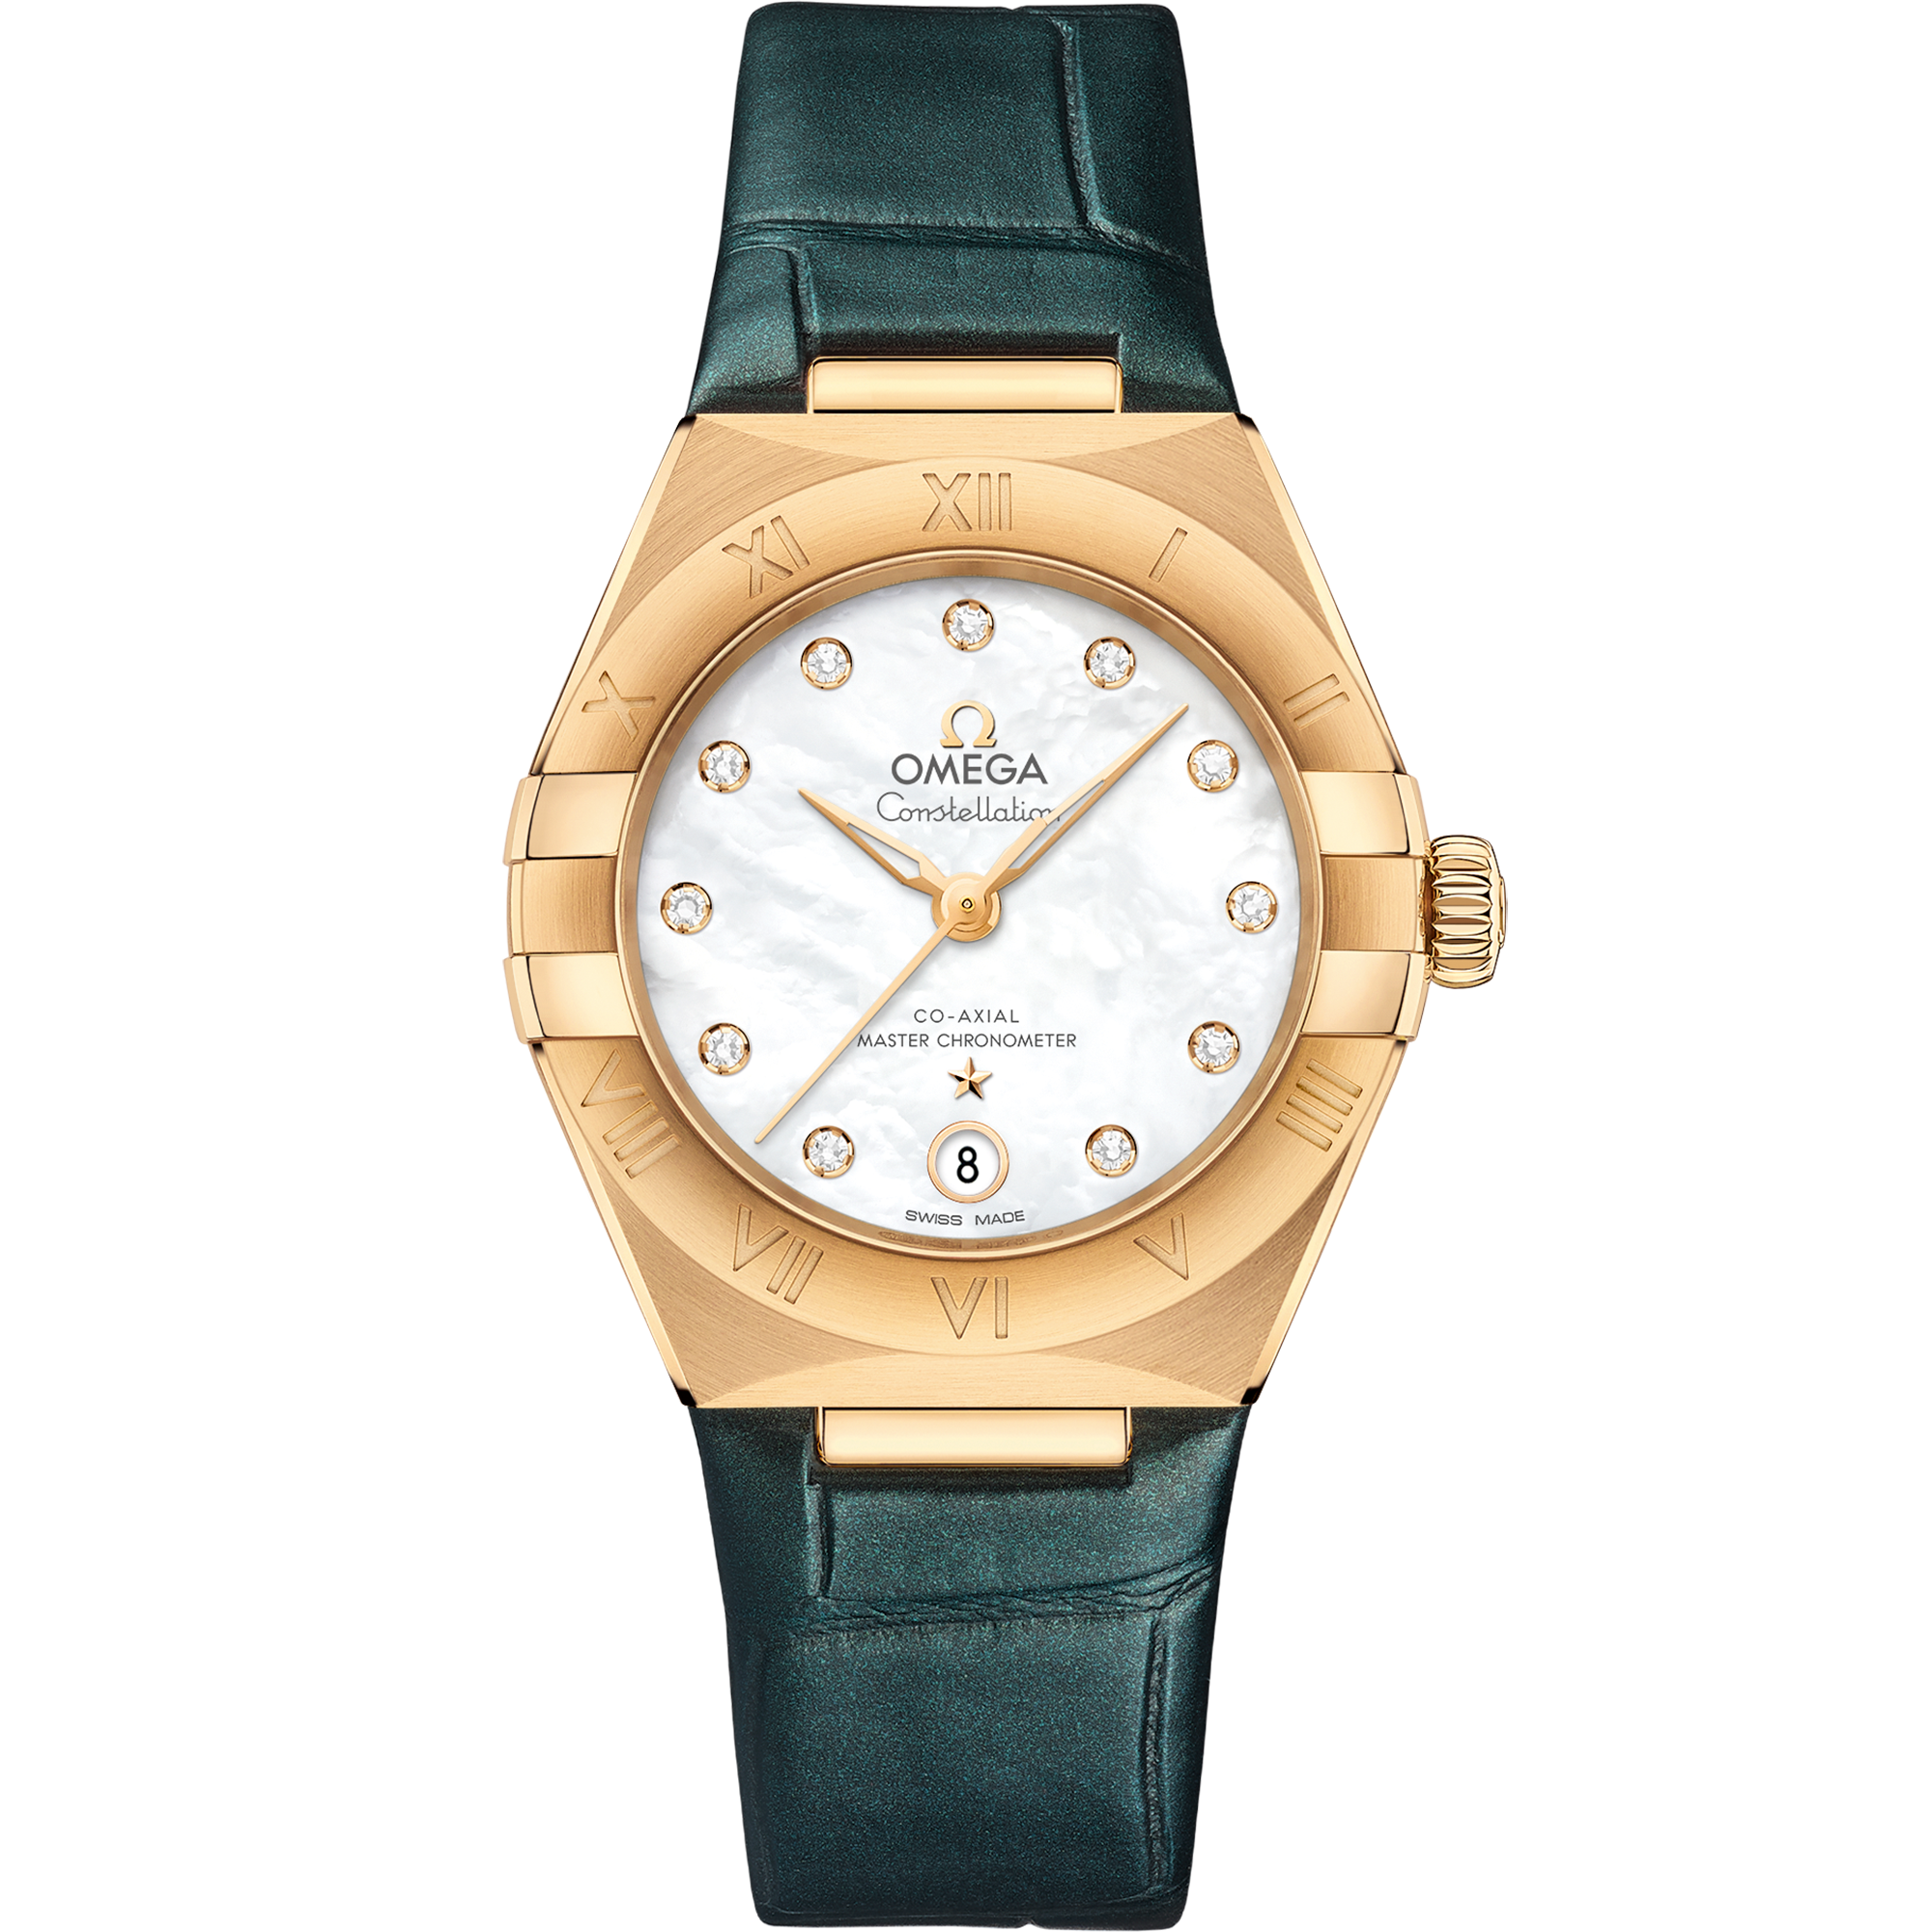 Constellation 29 mm, yellow gold on leather strap - 131.53.29.20.55.001